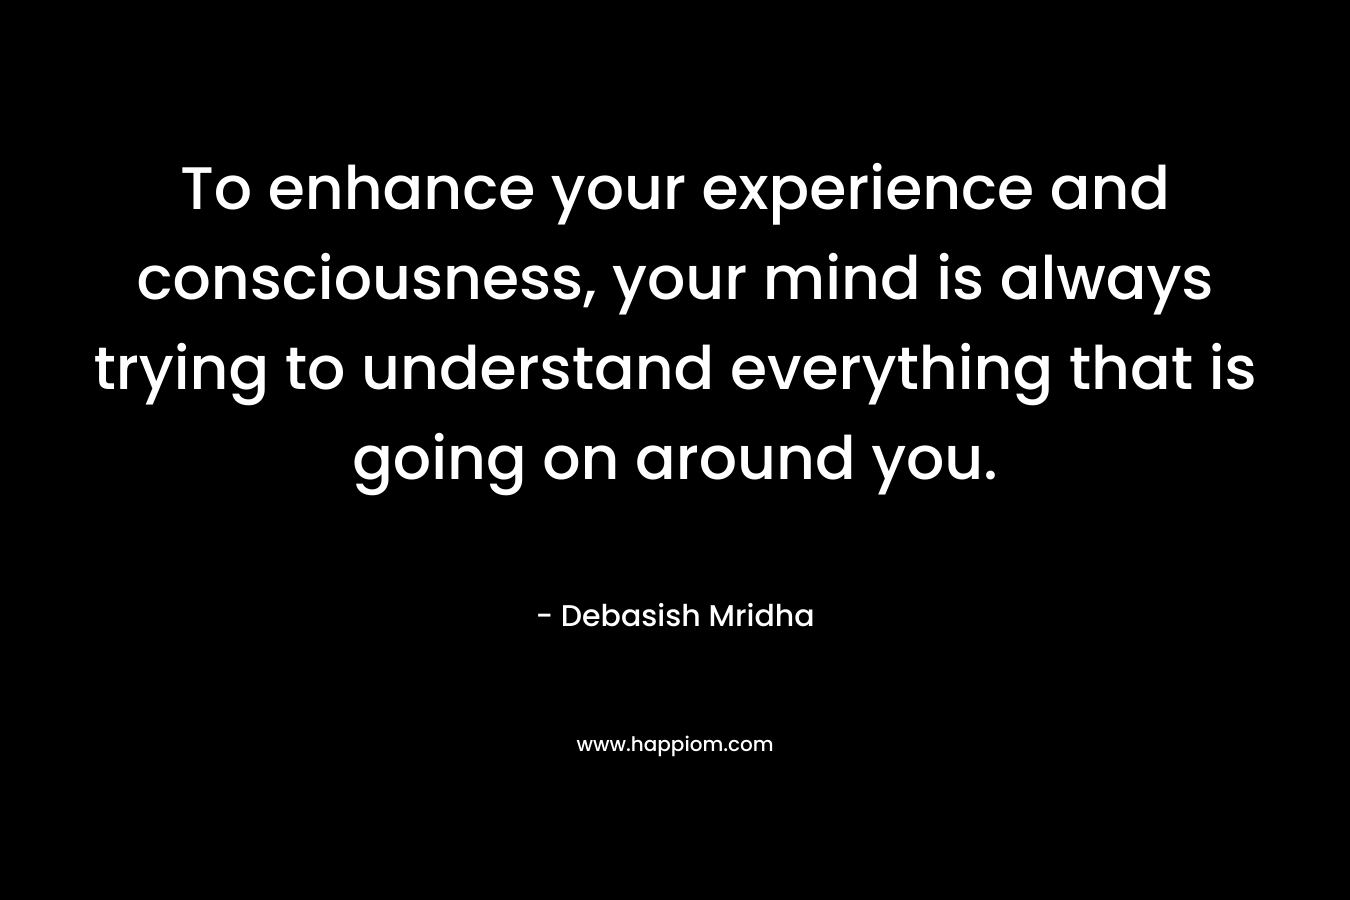 To enhance your experience and consciousness, your mind is always trying to understand everything that is going on around you.